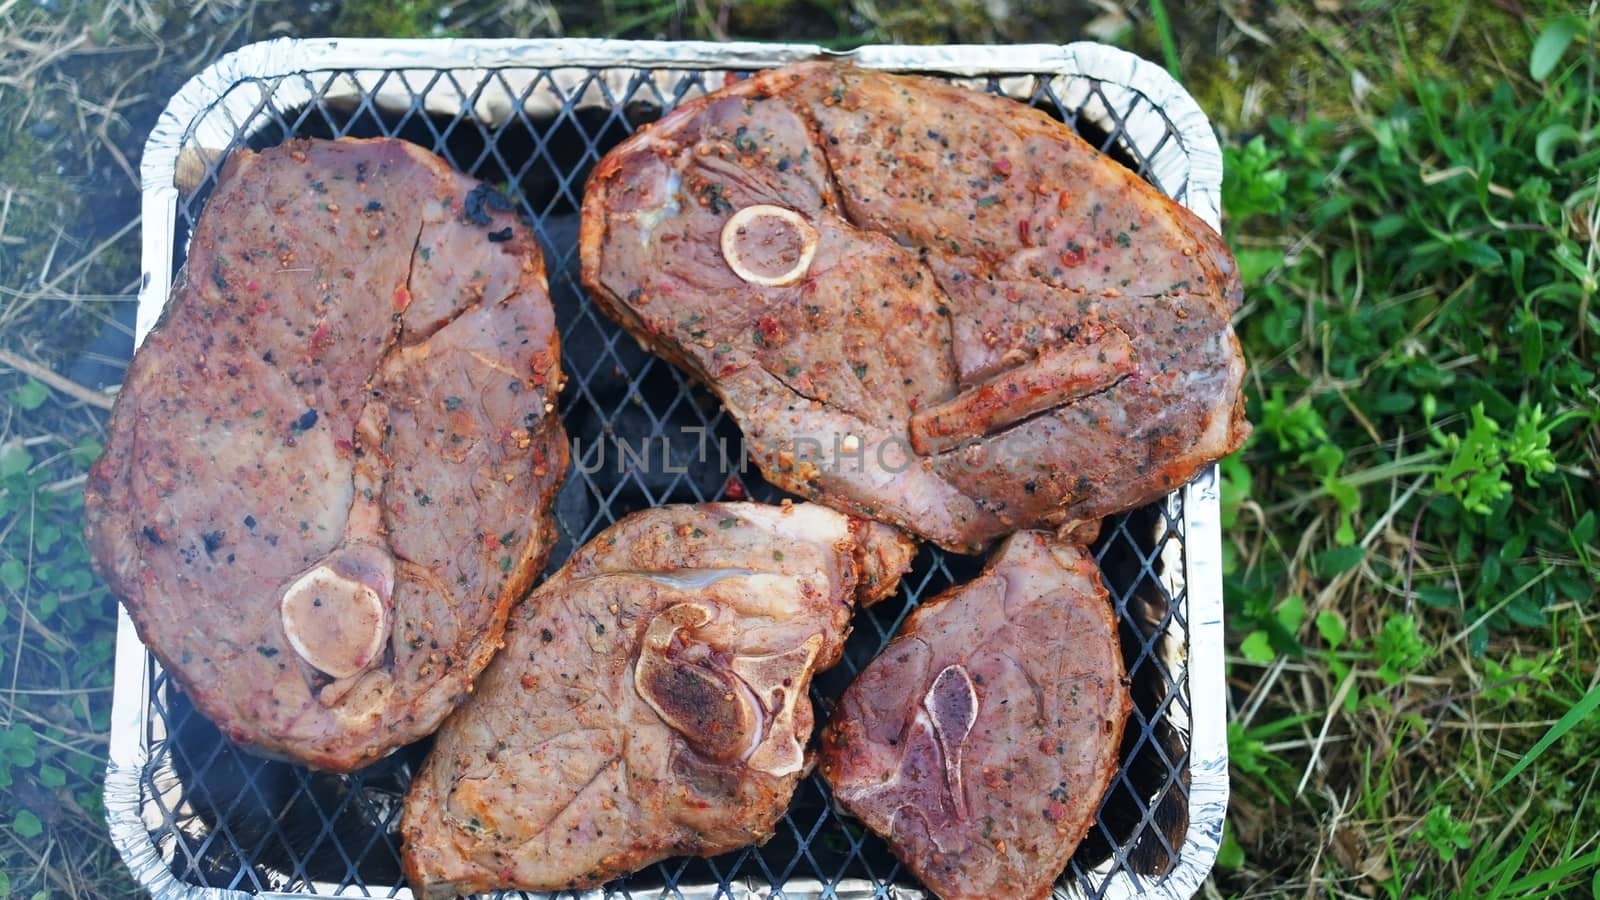 Lamb steaks on disposable grill by homocosmicos